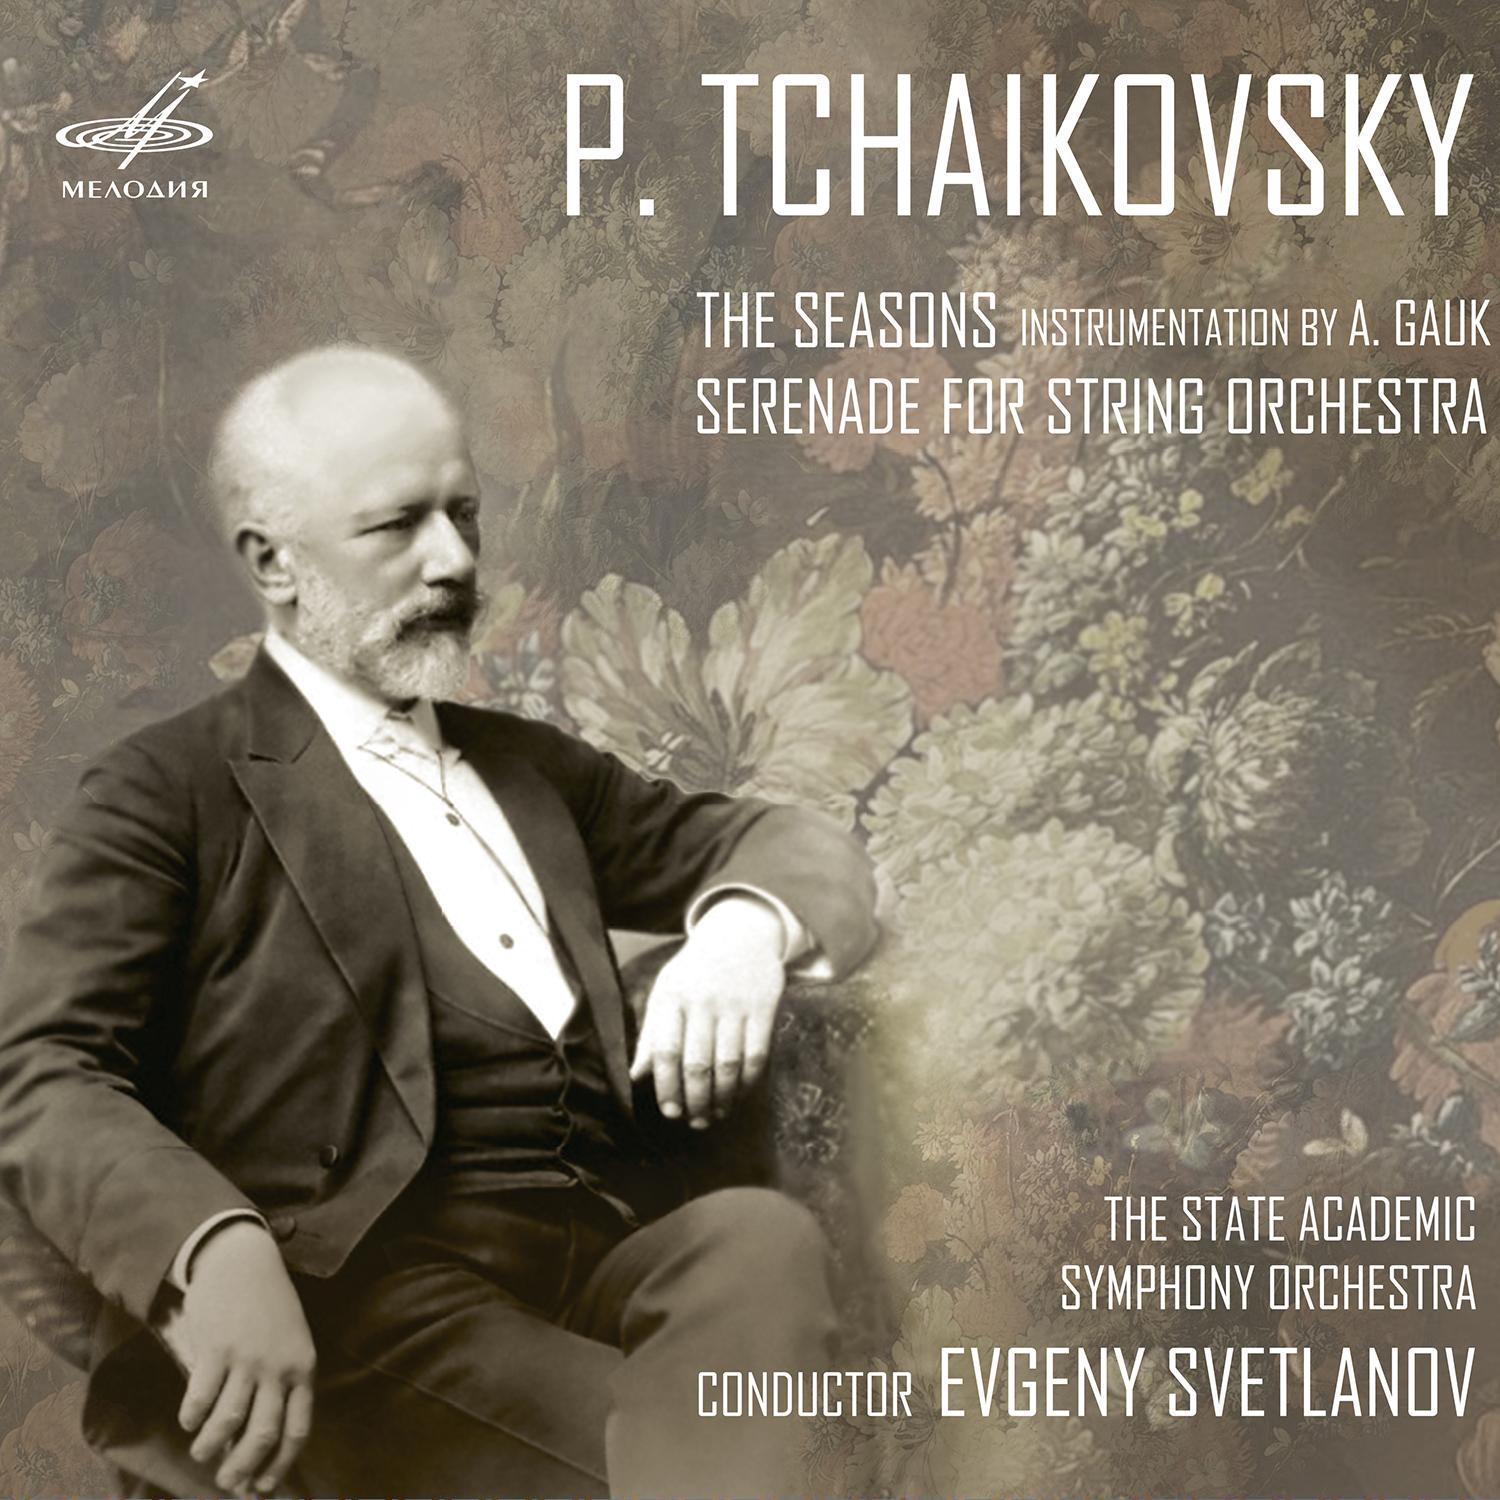 Tchaikovsky: The Seasons & Serenade for String Orchestra